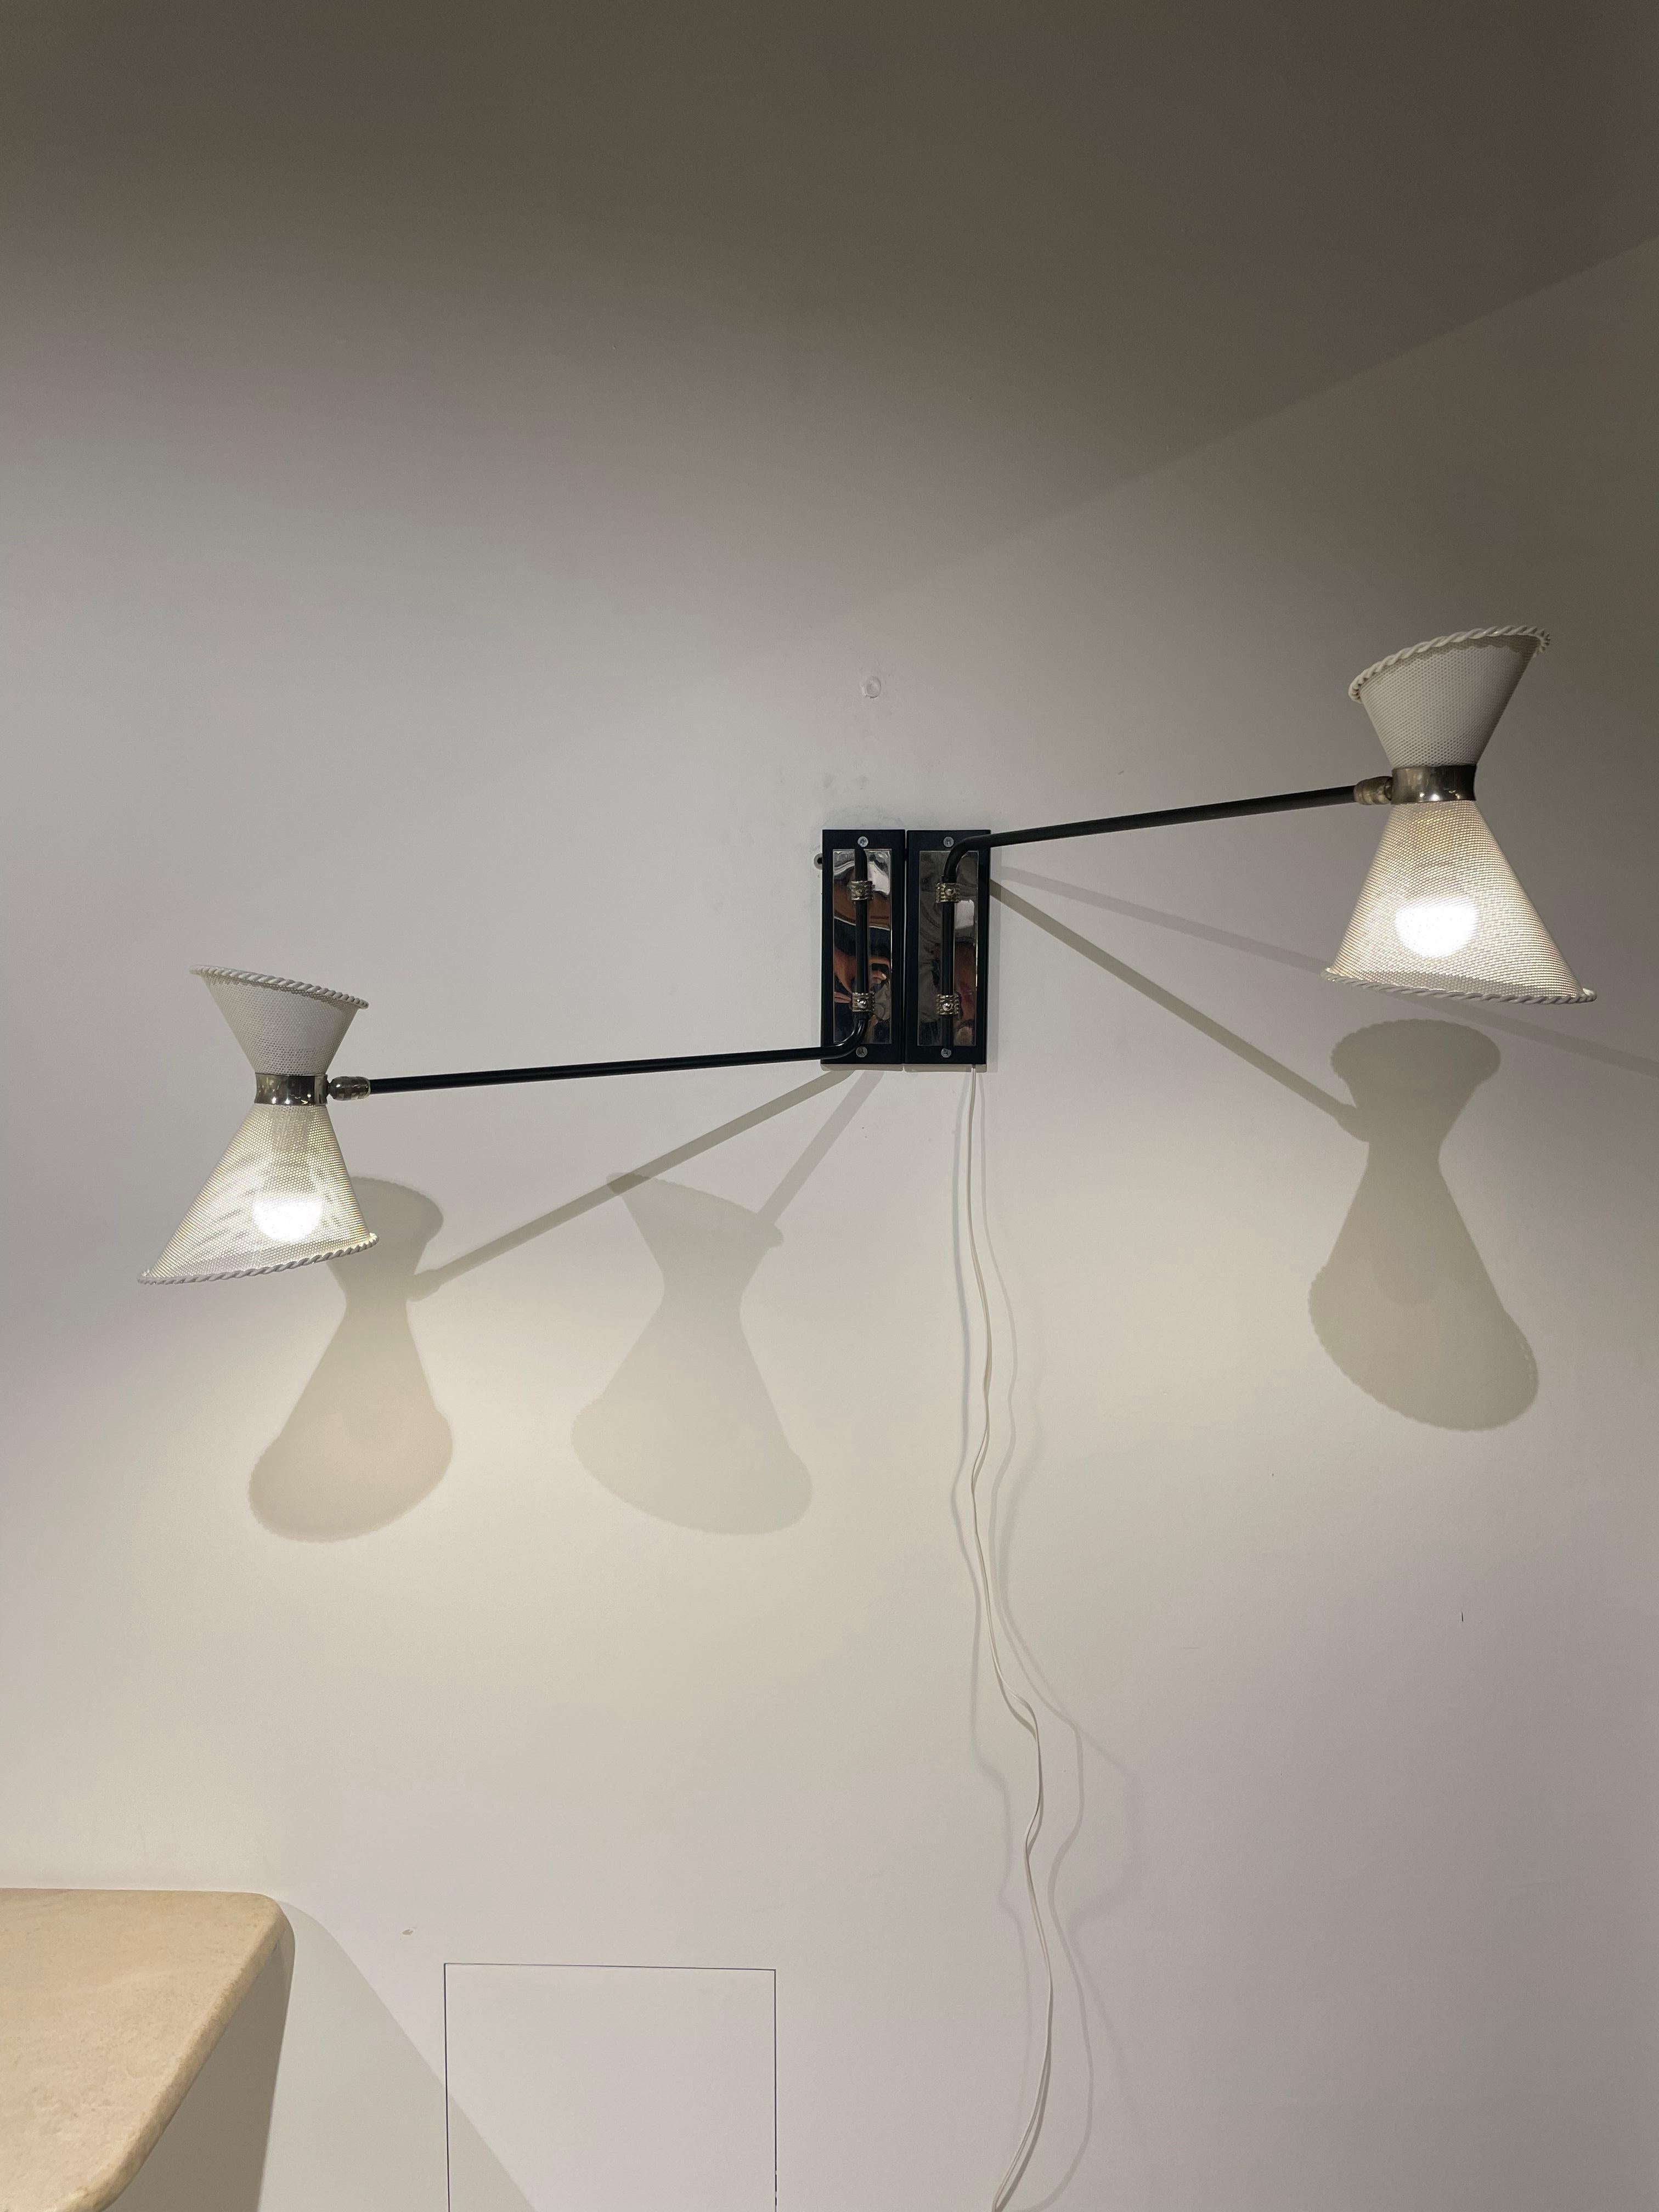 Mid-Century Modern Pair of Double Adjustable Wall Lights by Arlus 1950